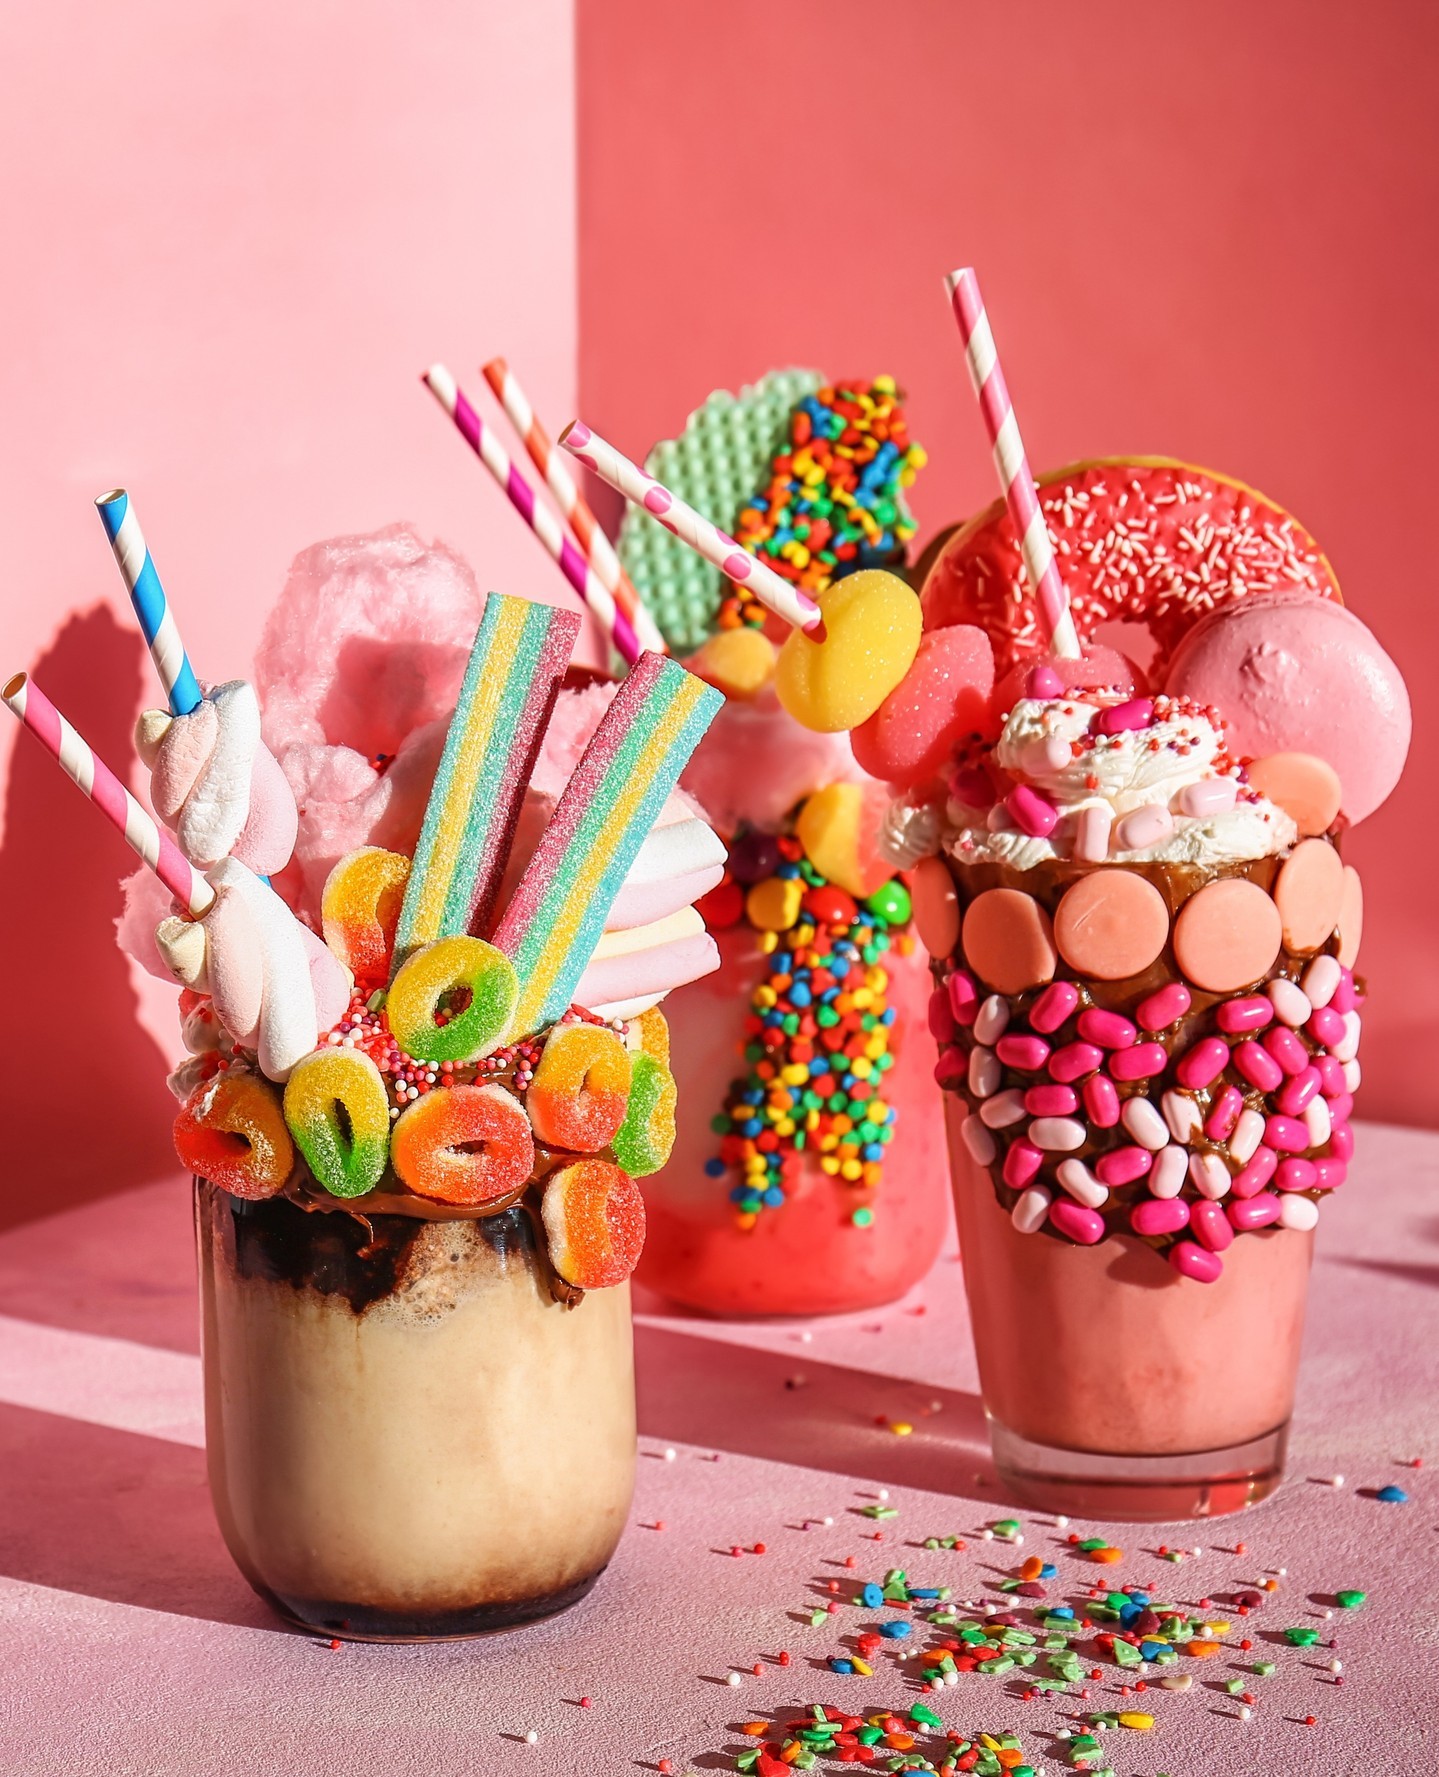 Fun Drink Spots in Las Vegas 🧋 If you decide to venture into Las Vegas, you might as well do it right with a drink (or two) in hand and with the help of these over-the-top sips (both alcoholic and not), you are indeed in for a Vegas-style treat. From massive milkshakes topped with gooey cake slices to eclectic boba flavors and Zodiac-inspired cocktails, we have a list of the top Insta-worthy, fun drink spots to try in Las Vegas. Check out the list at FabulousNevada.com.